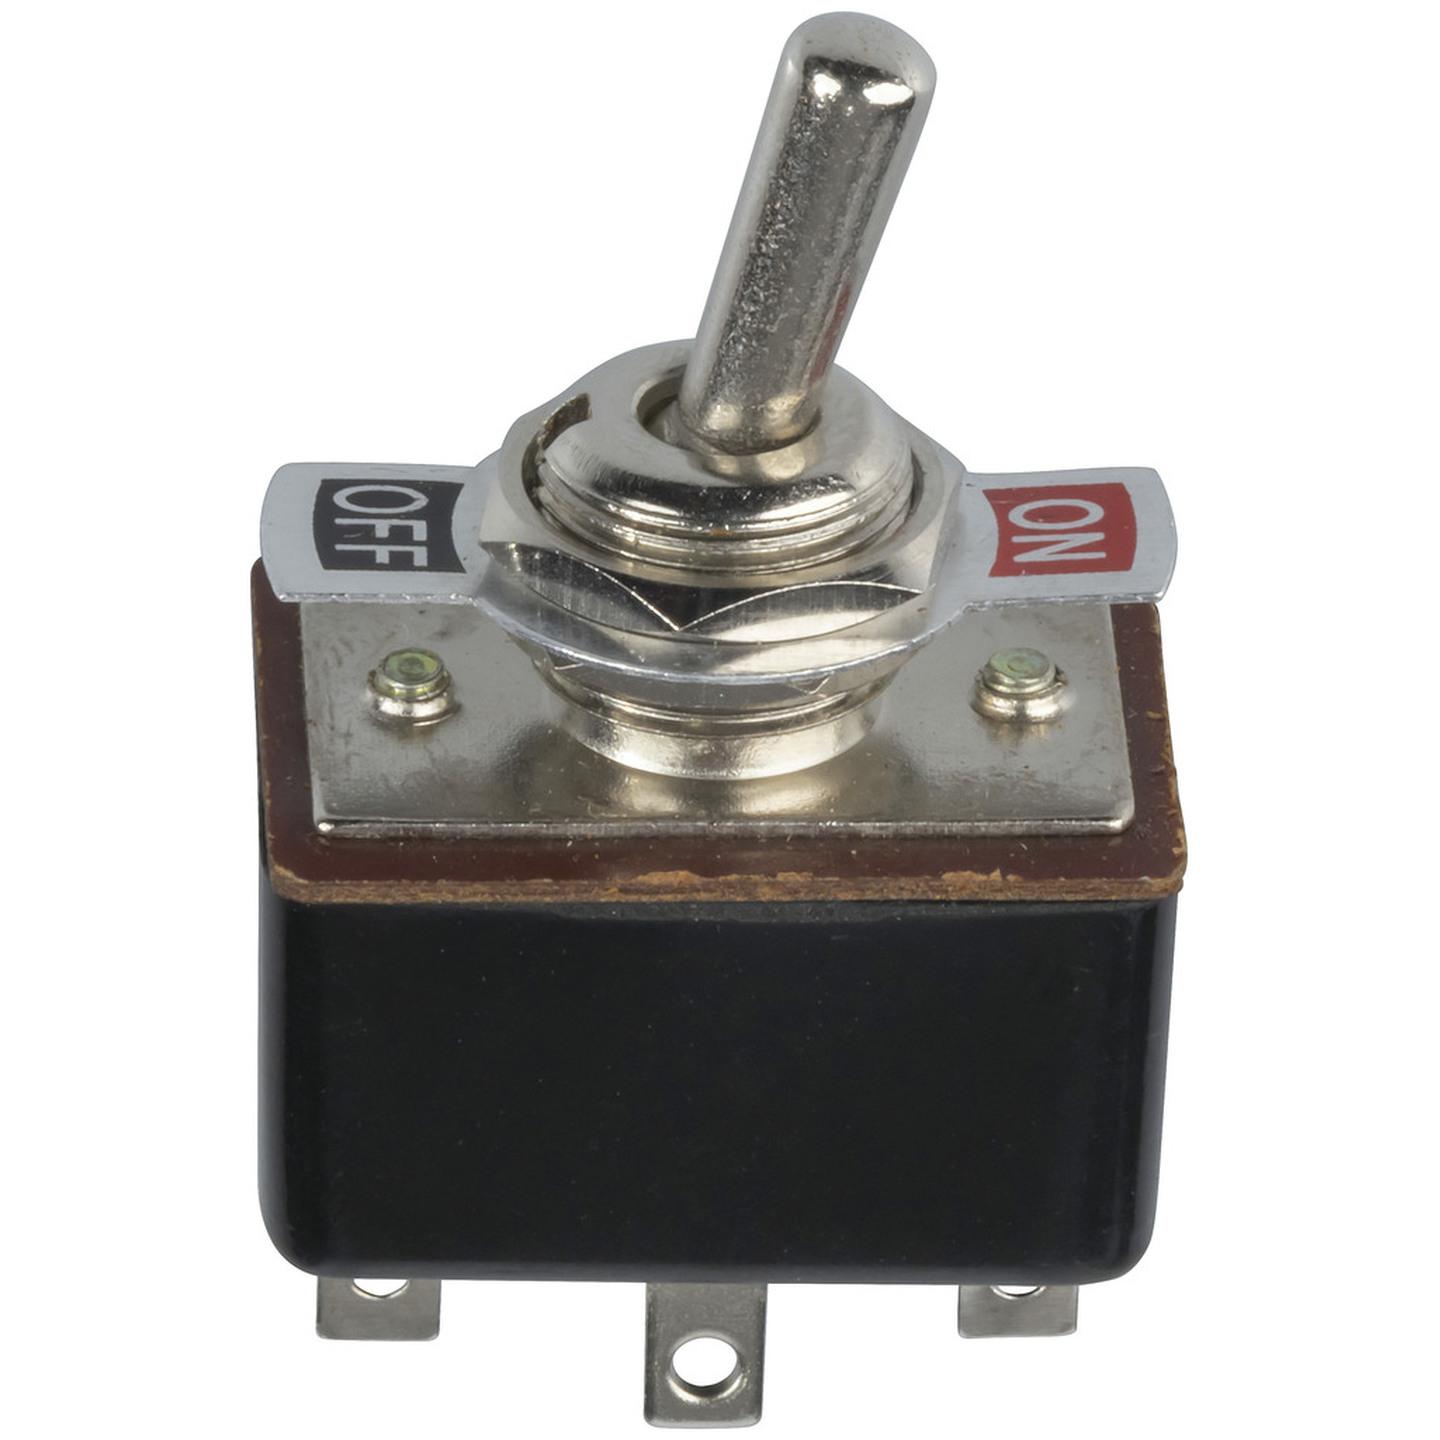 DPDT Standard Toggle Switch